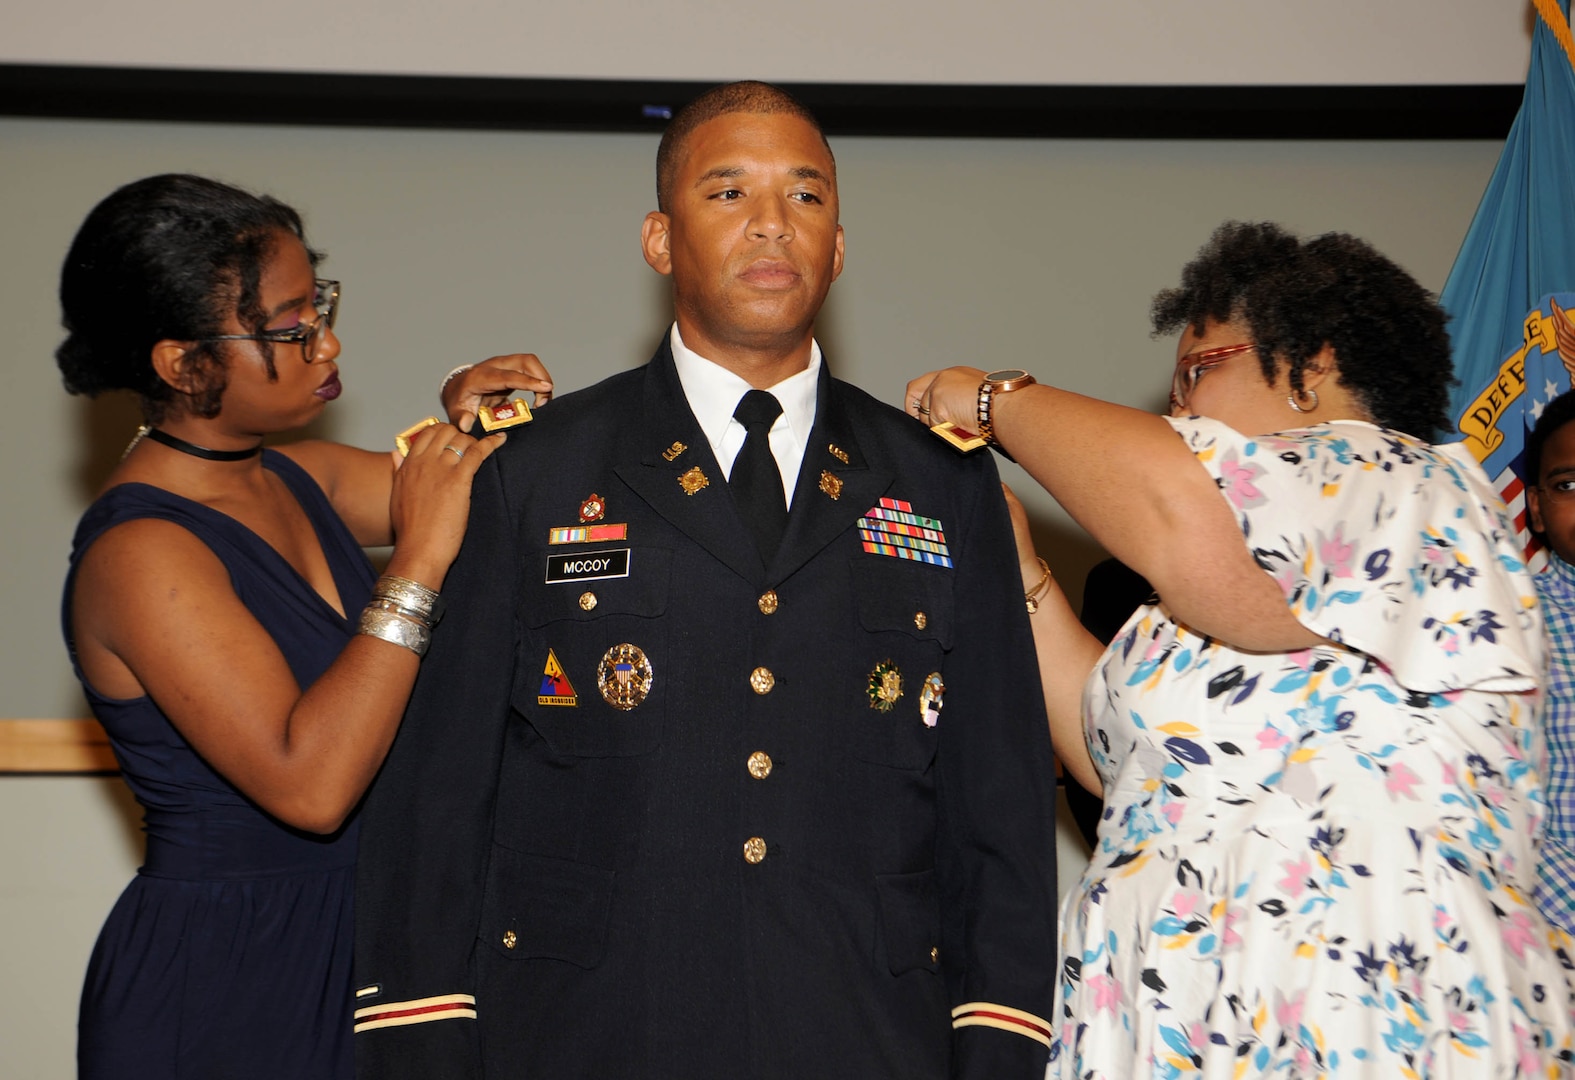 Daughter Maria McCoy, left, and wife, Bernice McCoy, right, place the new colonel rank on the shoulders of Army Col. Eric McCoy, center, during his promotion ceremony at DLA Troop Support in Philadelphia, Oct. 3, 2019. McCoy, a Baltimore native, is the Troop Support Subsistence supply chain director. (Photo by Ed Maldonado/DLA Troop Support)